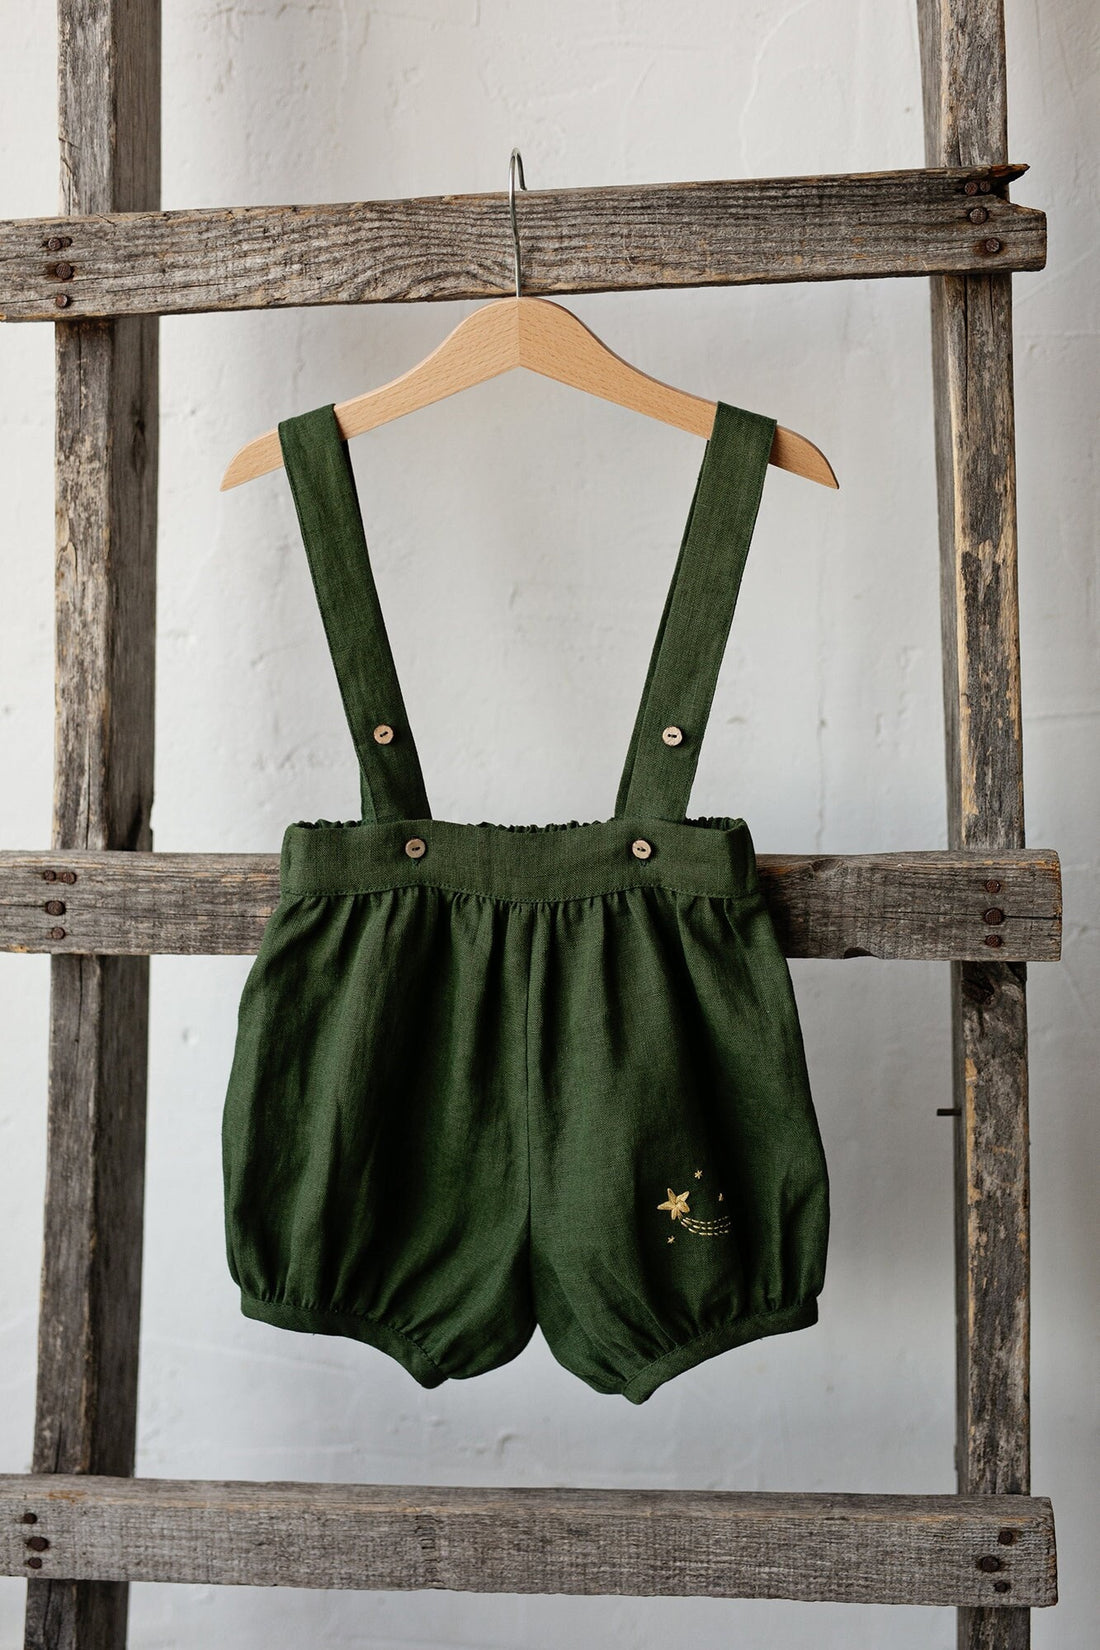 Forest Green Shorts with Suspenders